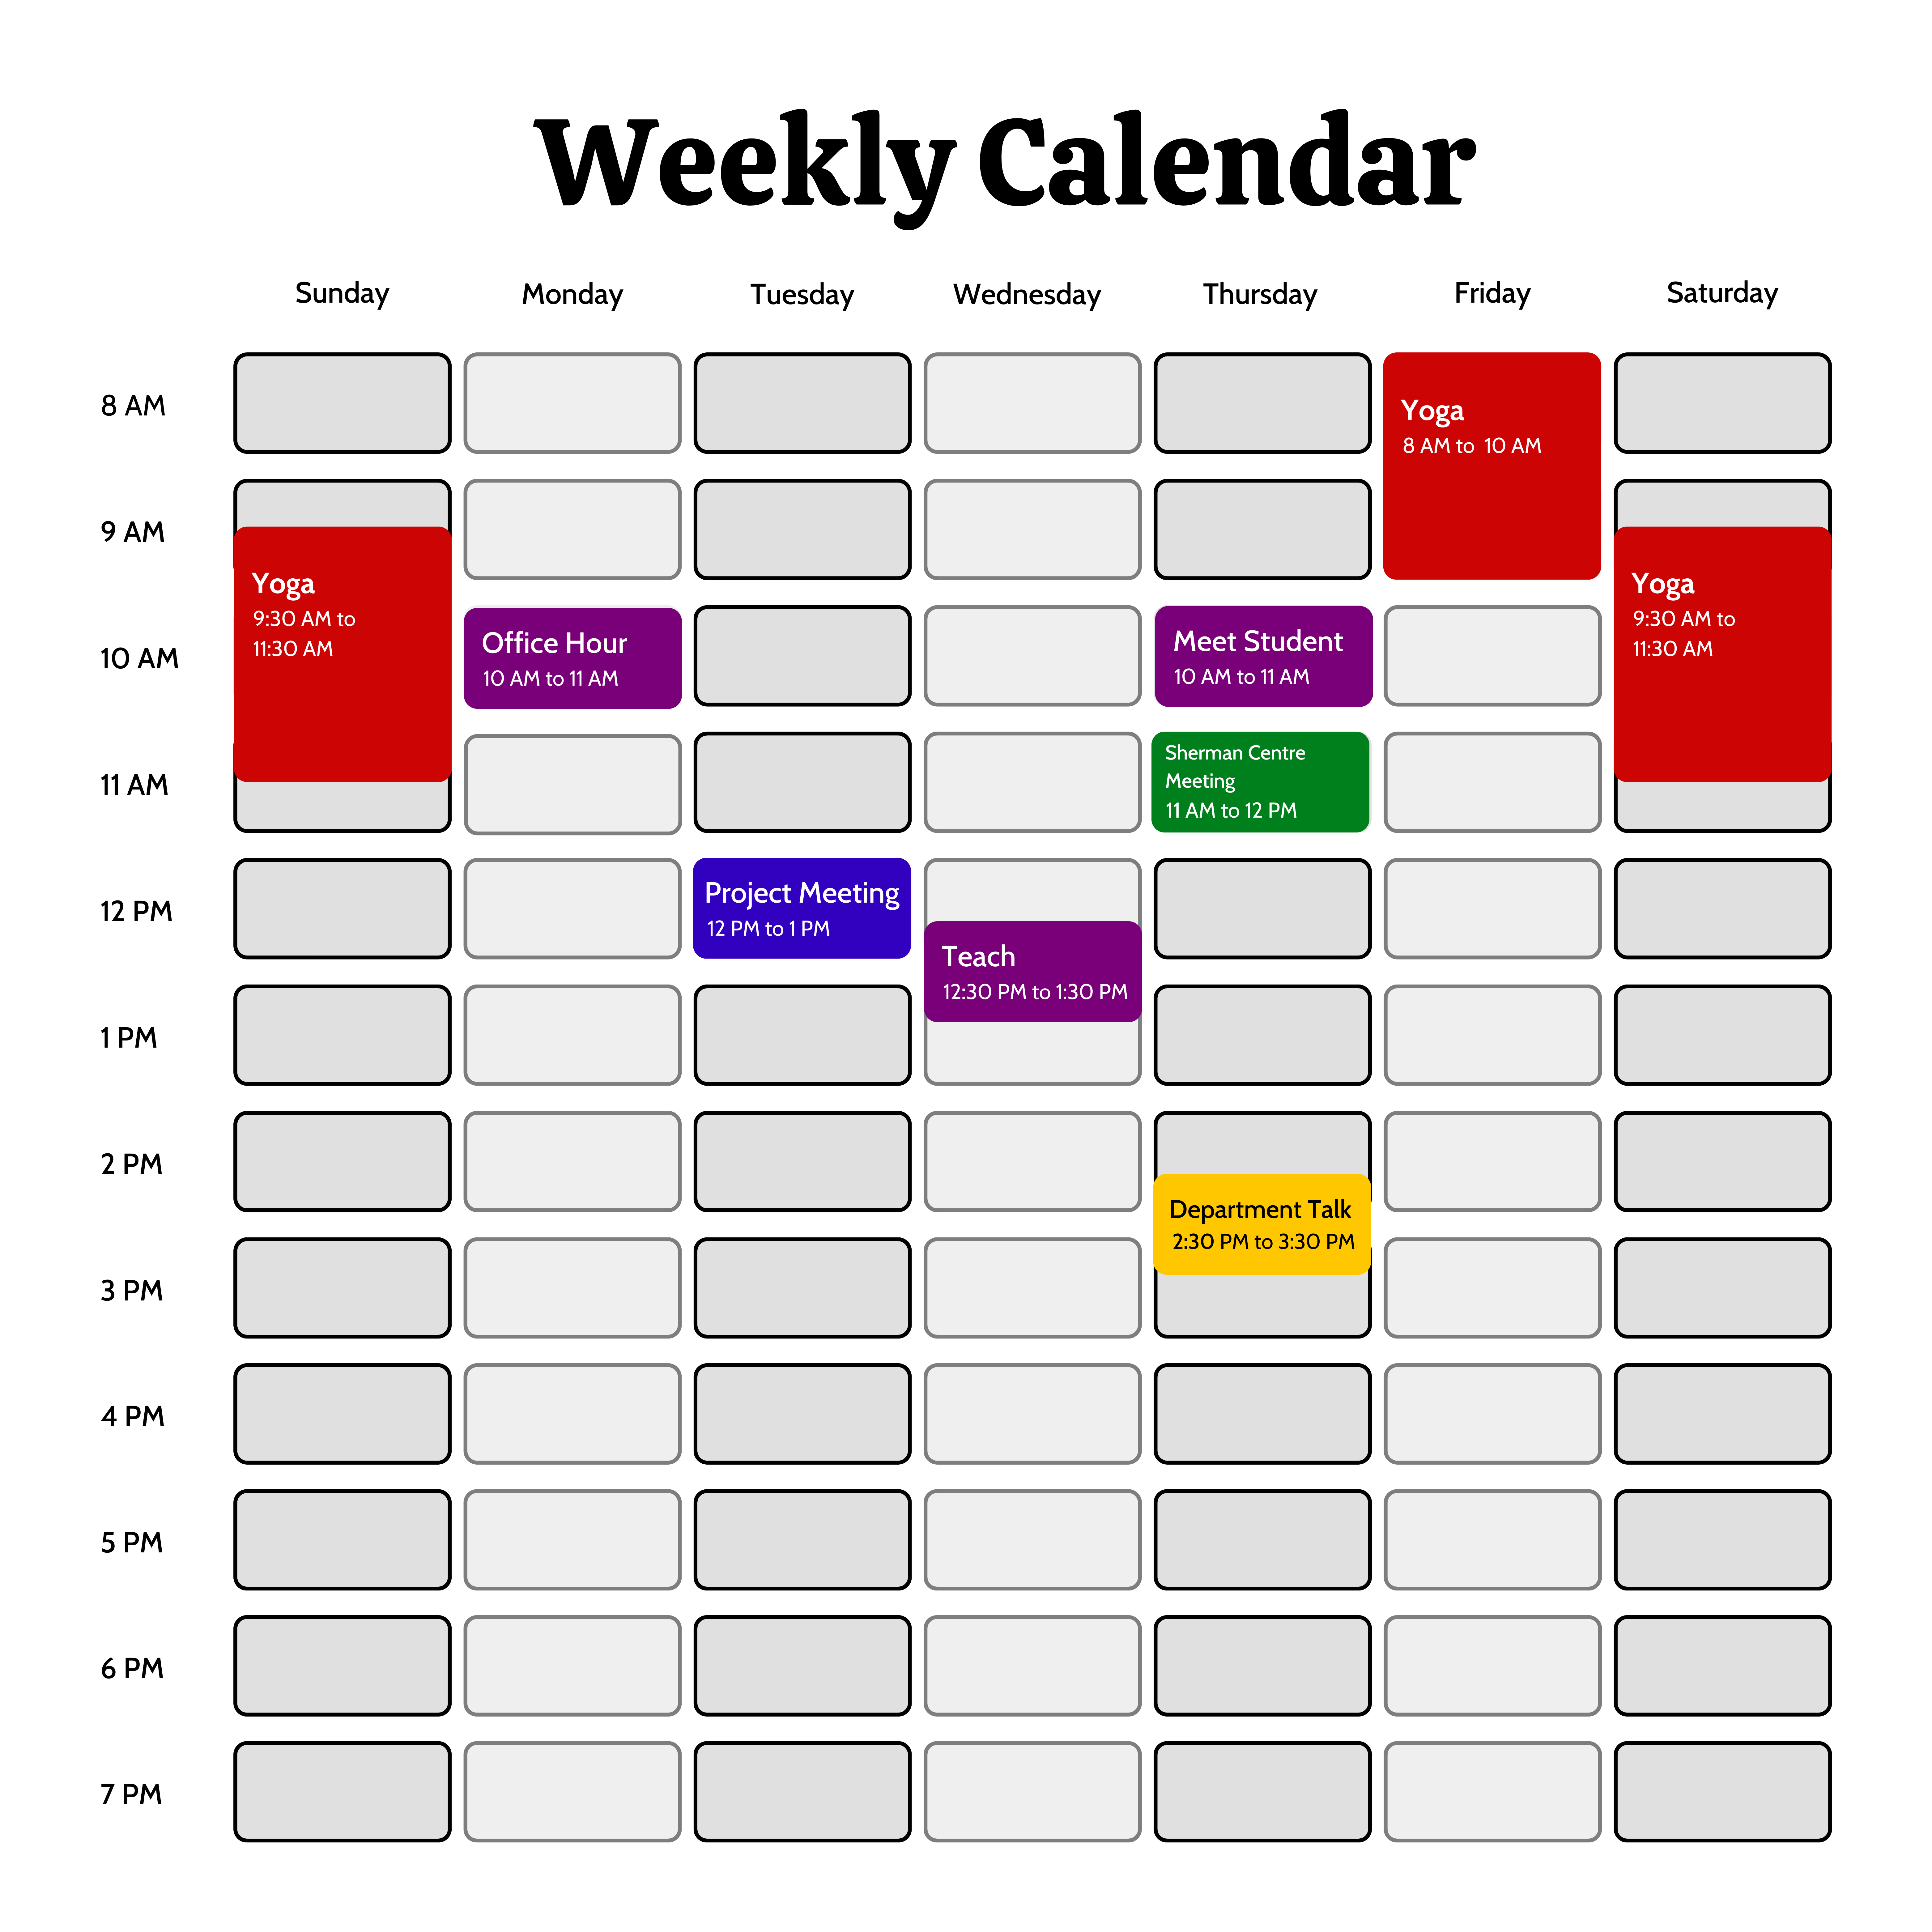 Poorly planned sample weekly schedule with text description below.